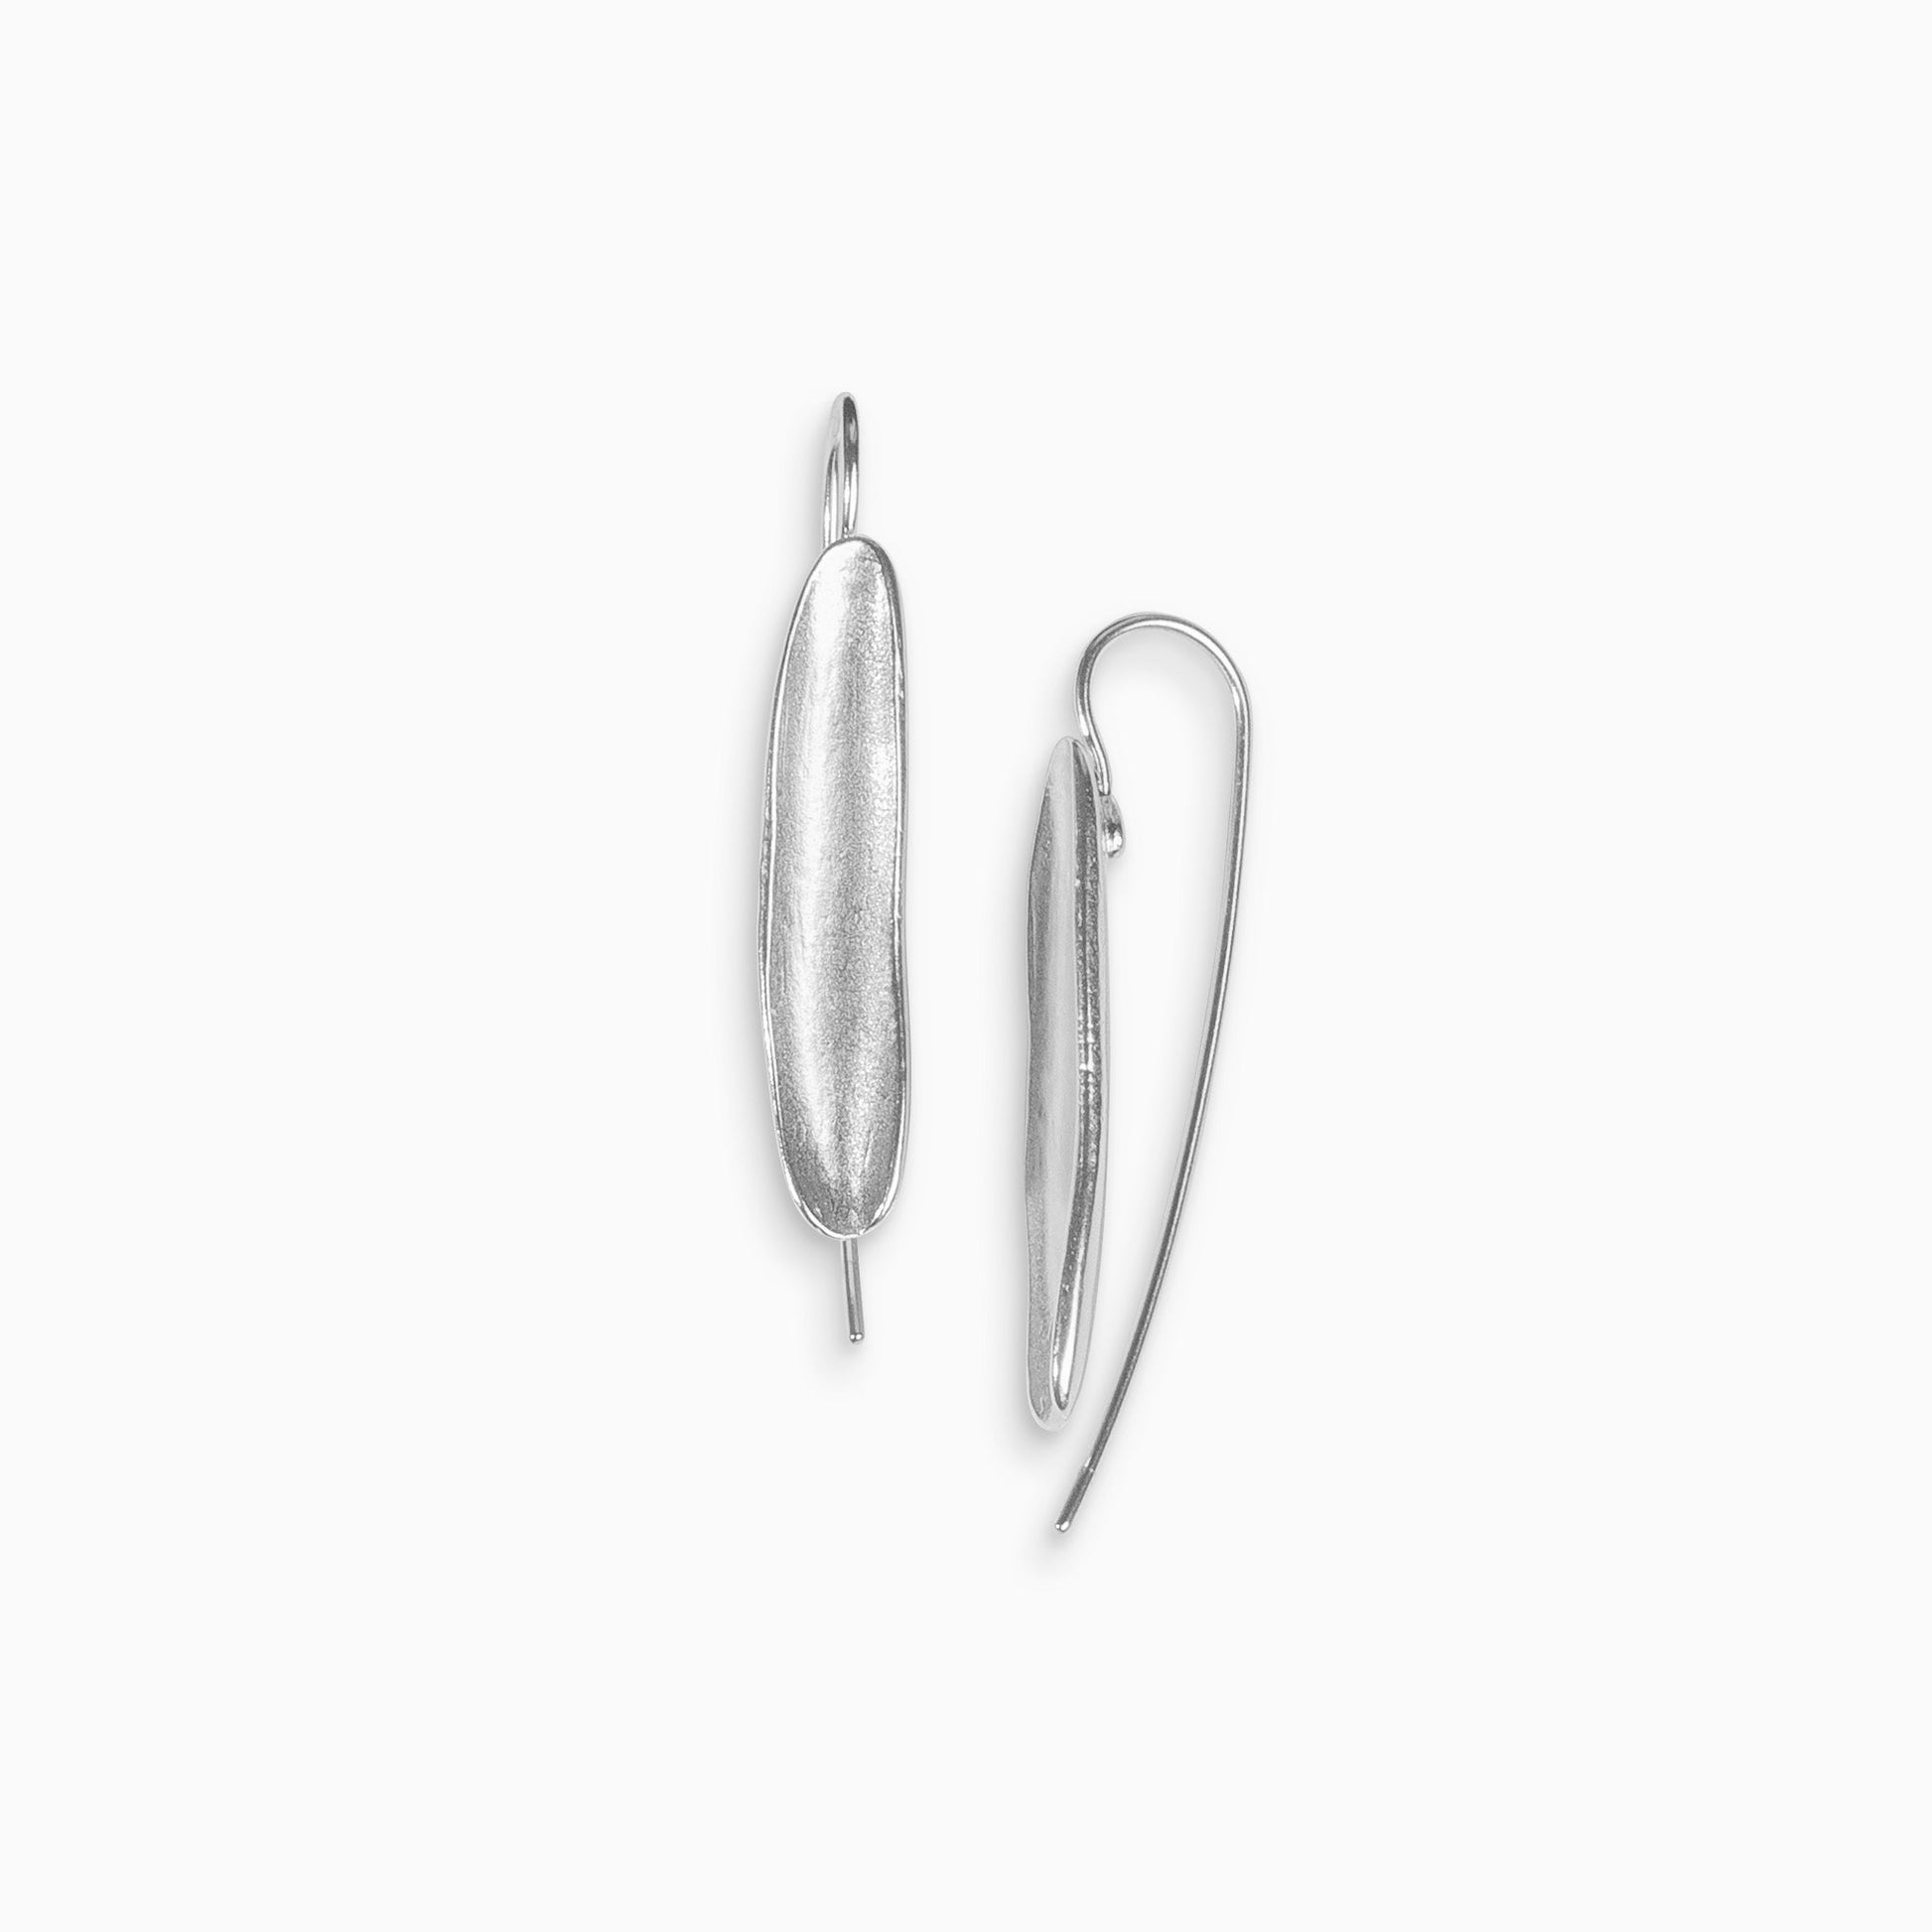 A pair of Recycled silver concave long oval shaped earrings with a hook fastening. Satin finish. 35mm length, 6mm width